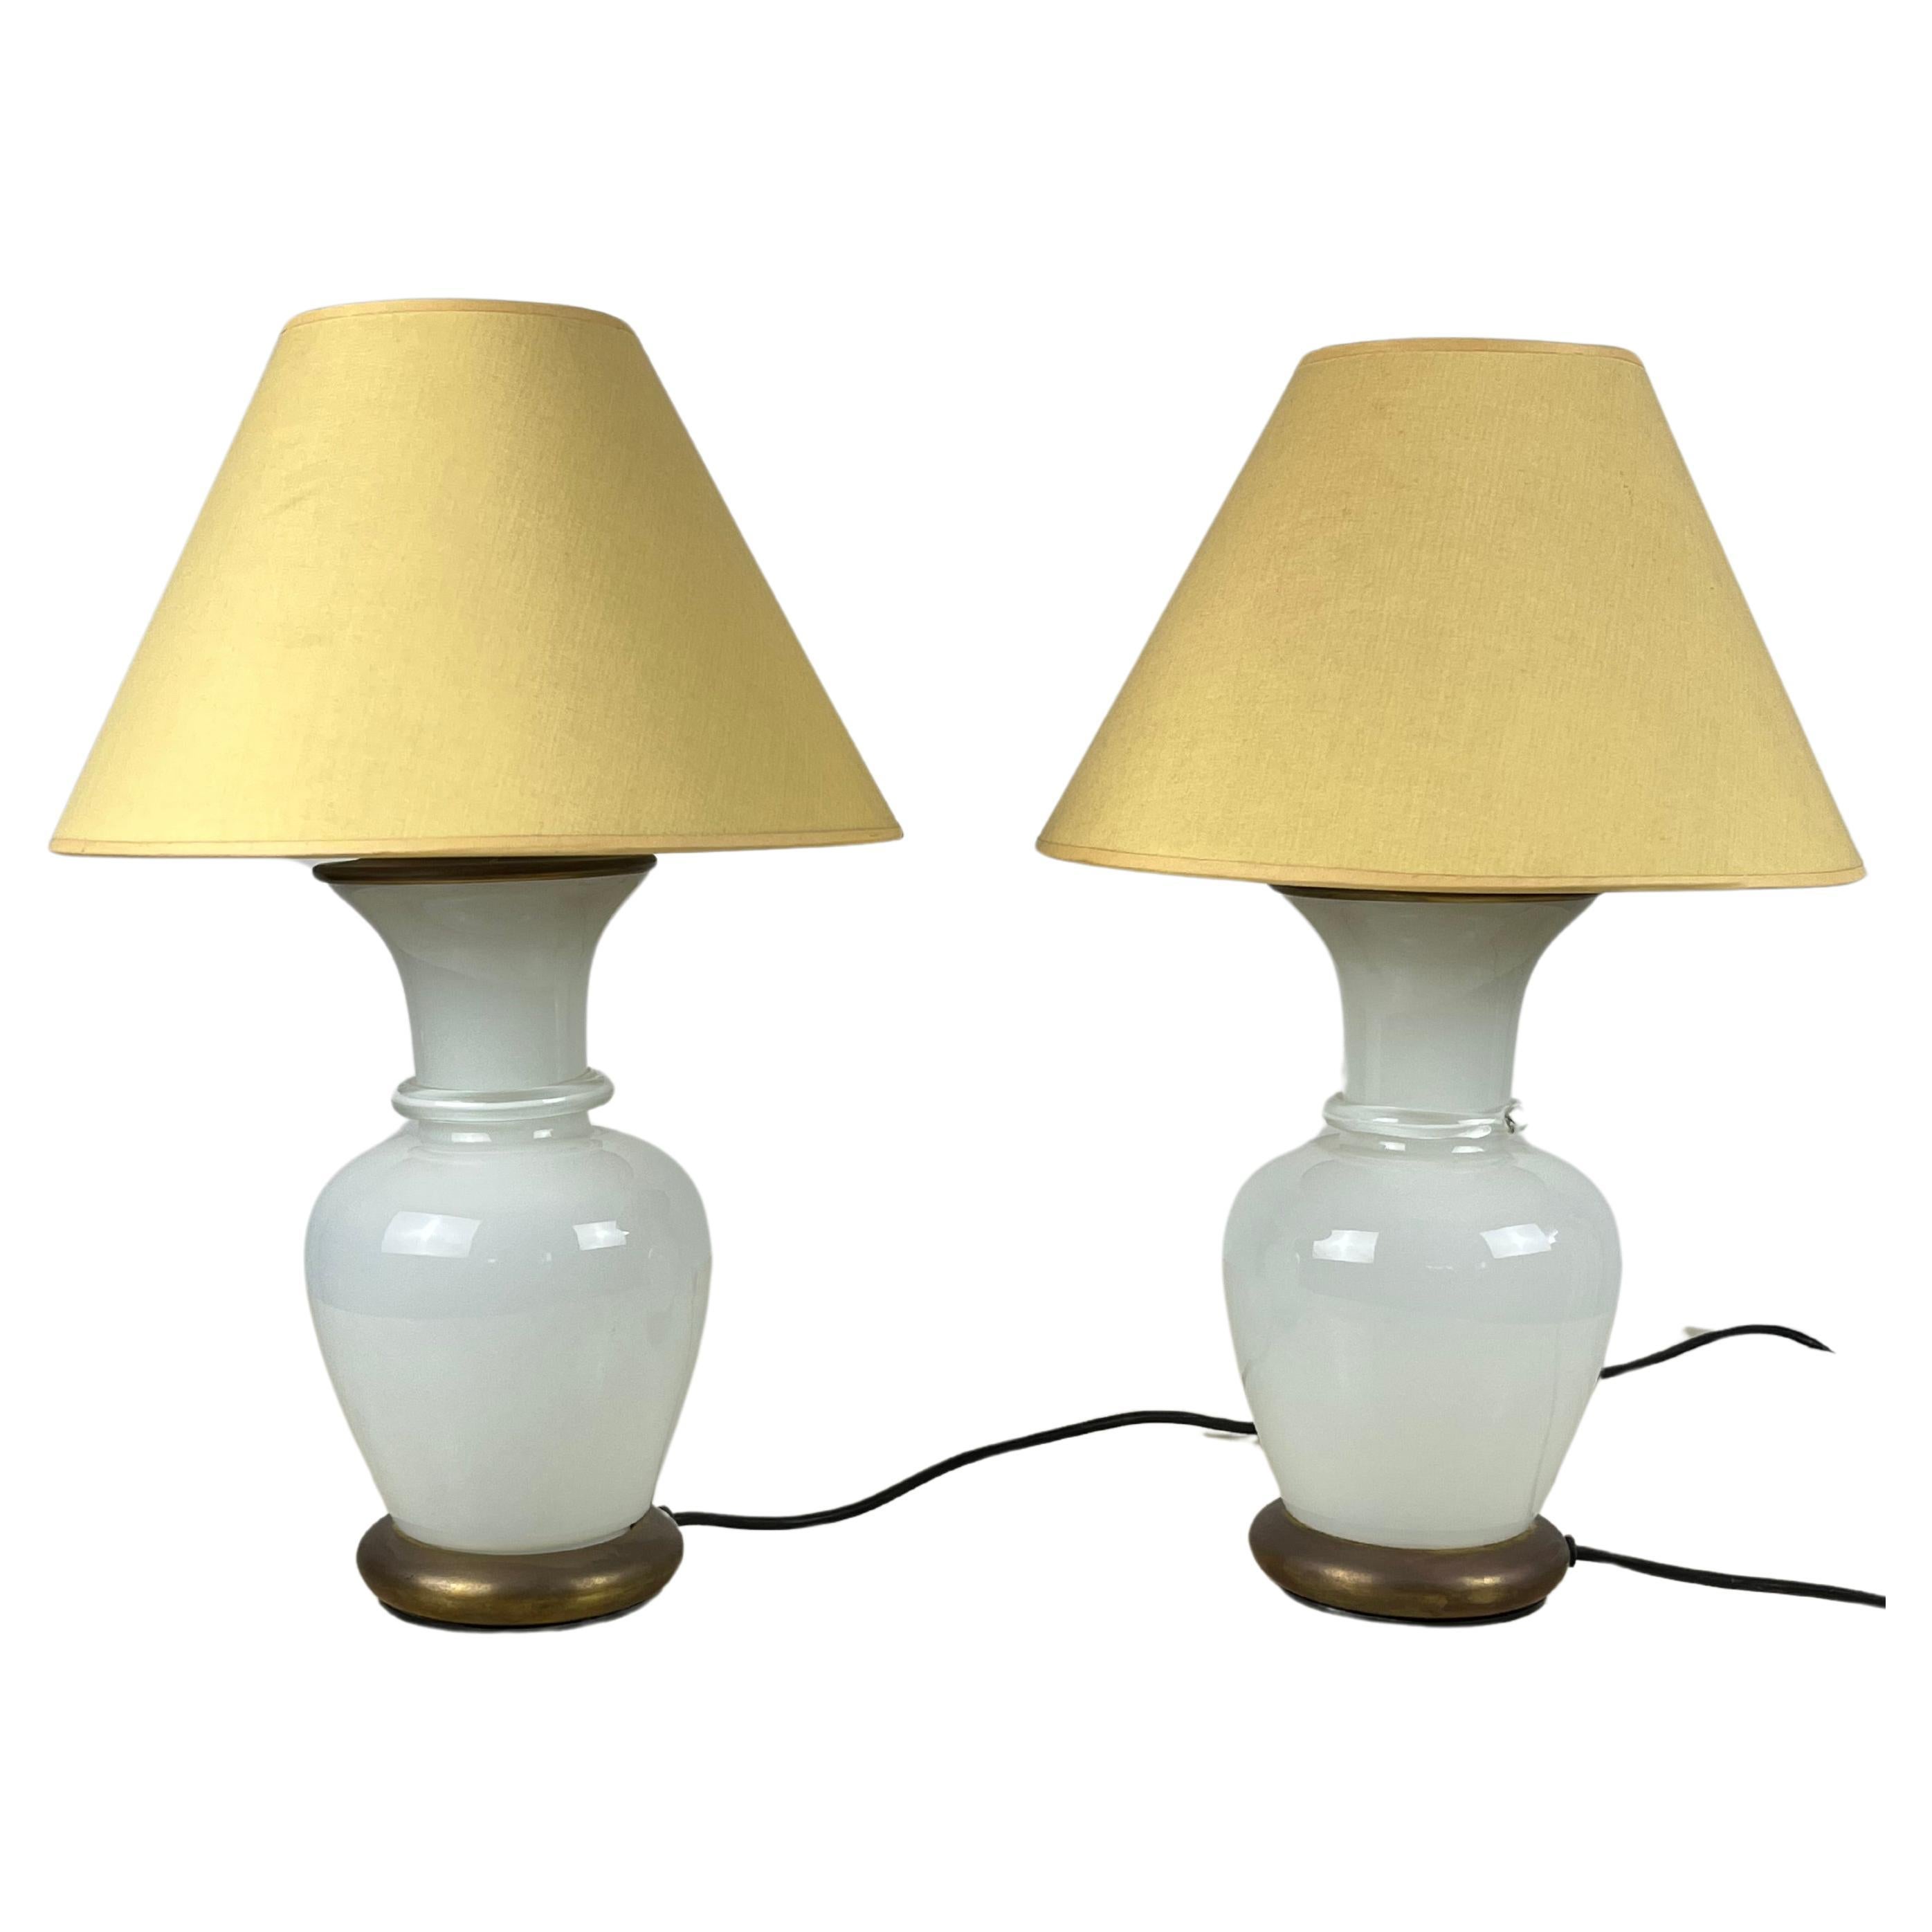 Set of 2 Murano Glass and Brass Table Lamps, F. Fabbian, Italy, 1970s